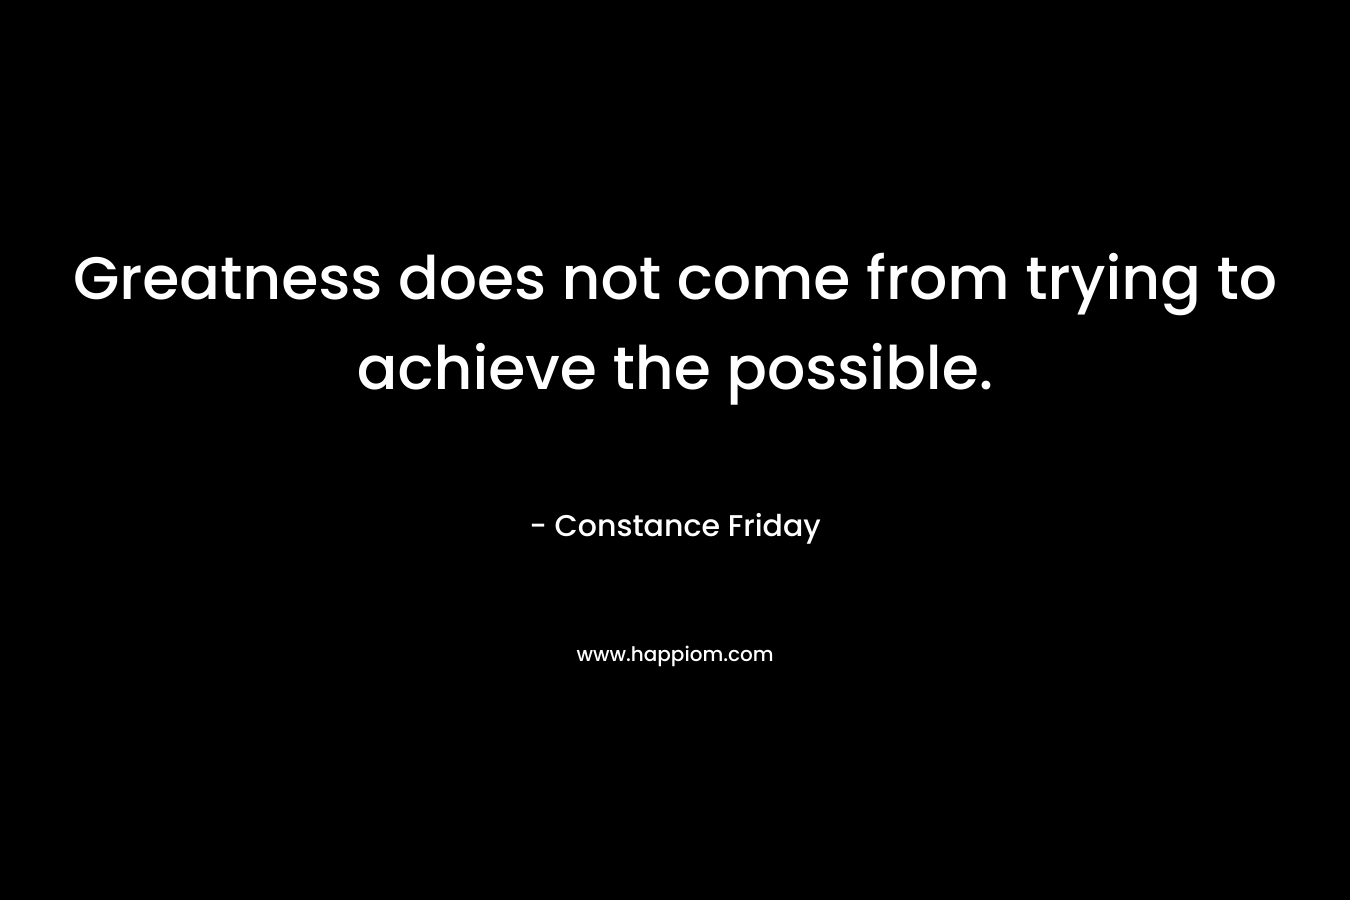 Greatness does not come from trying to achieve the possible. – Constance Friday